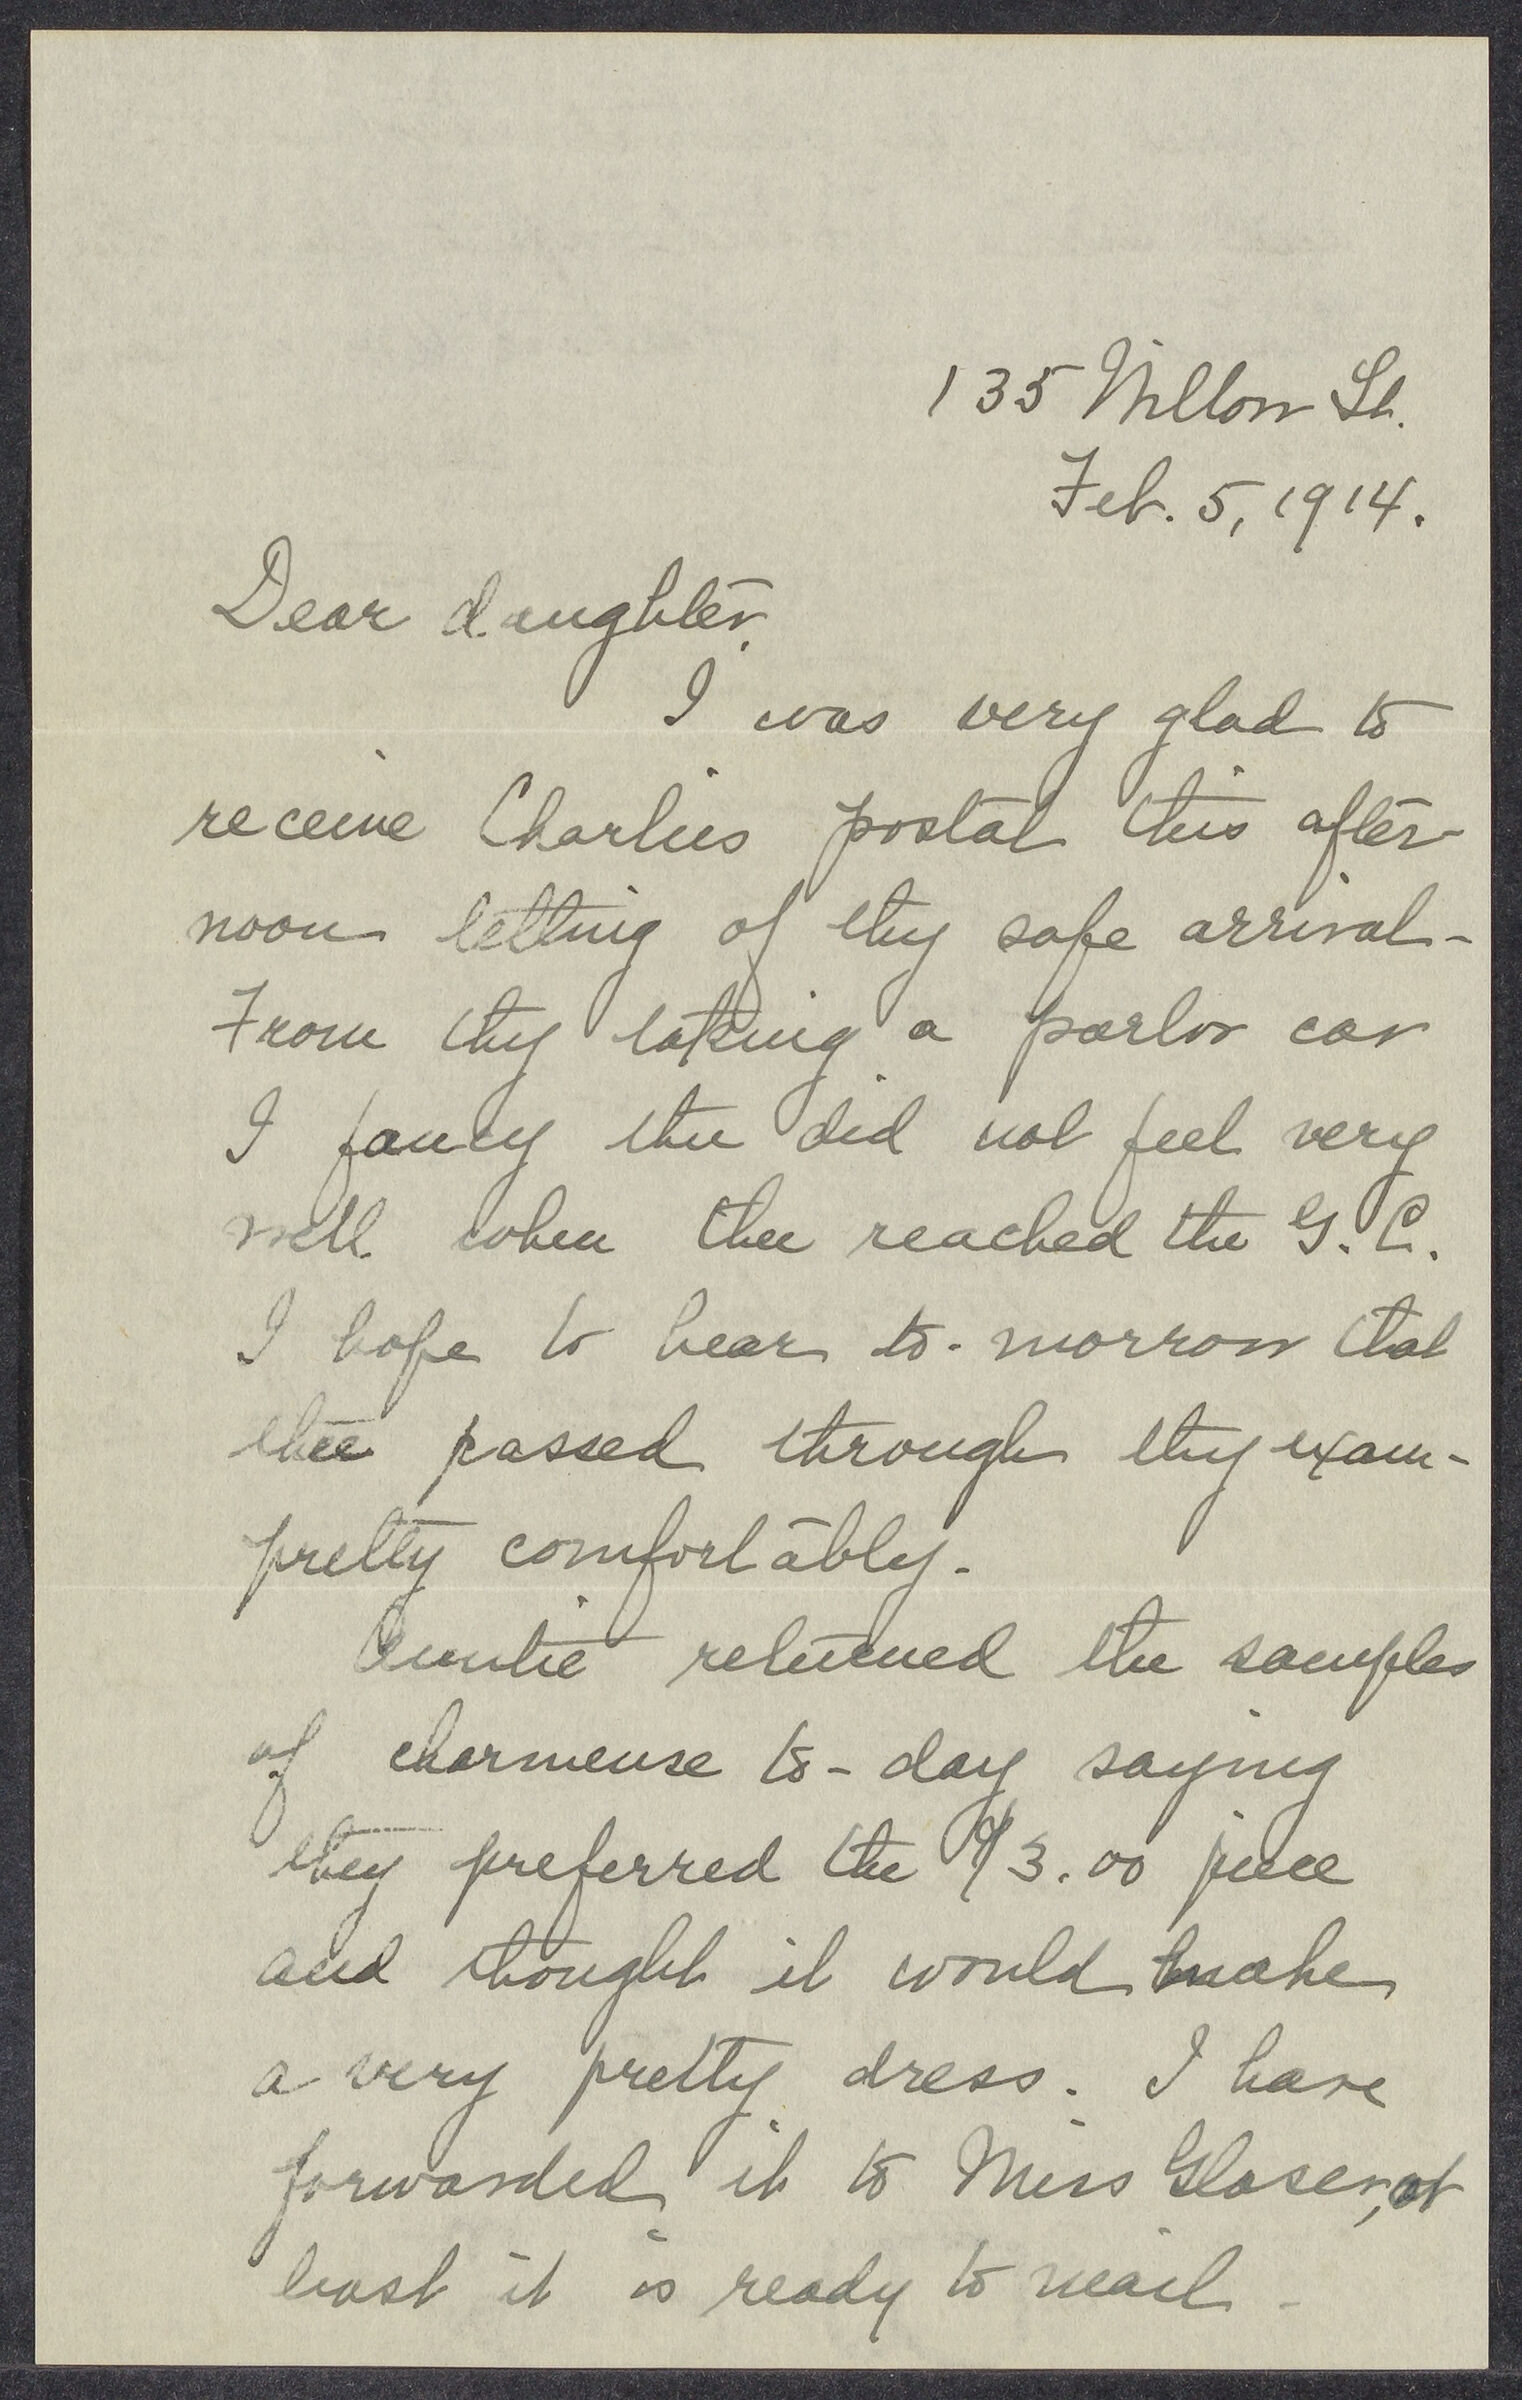 Letters from Eleanor Stabler Brooks's parents to Eleanor Stabler Brooks, February-March, 1914